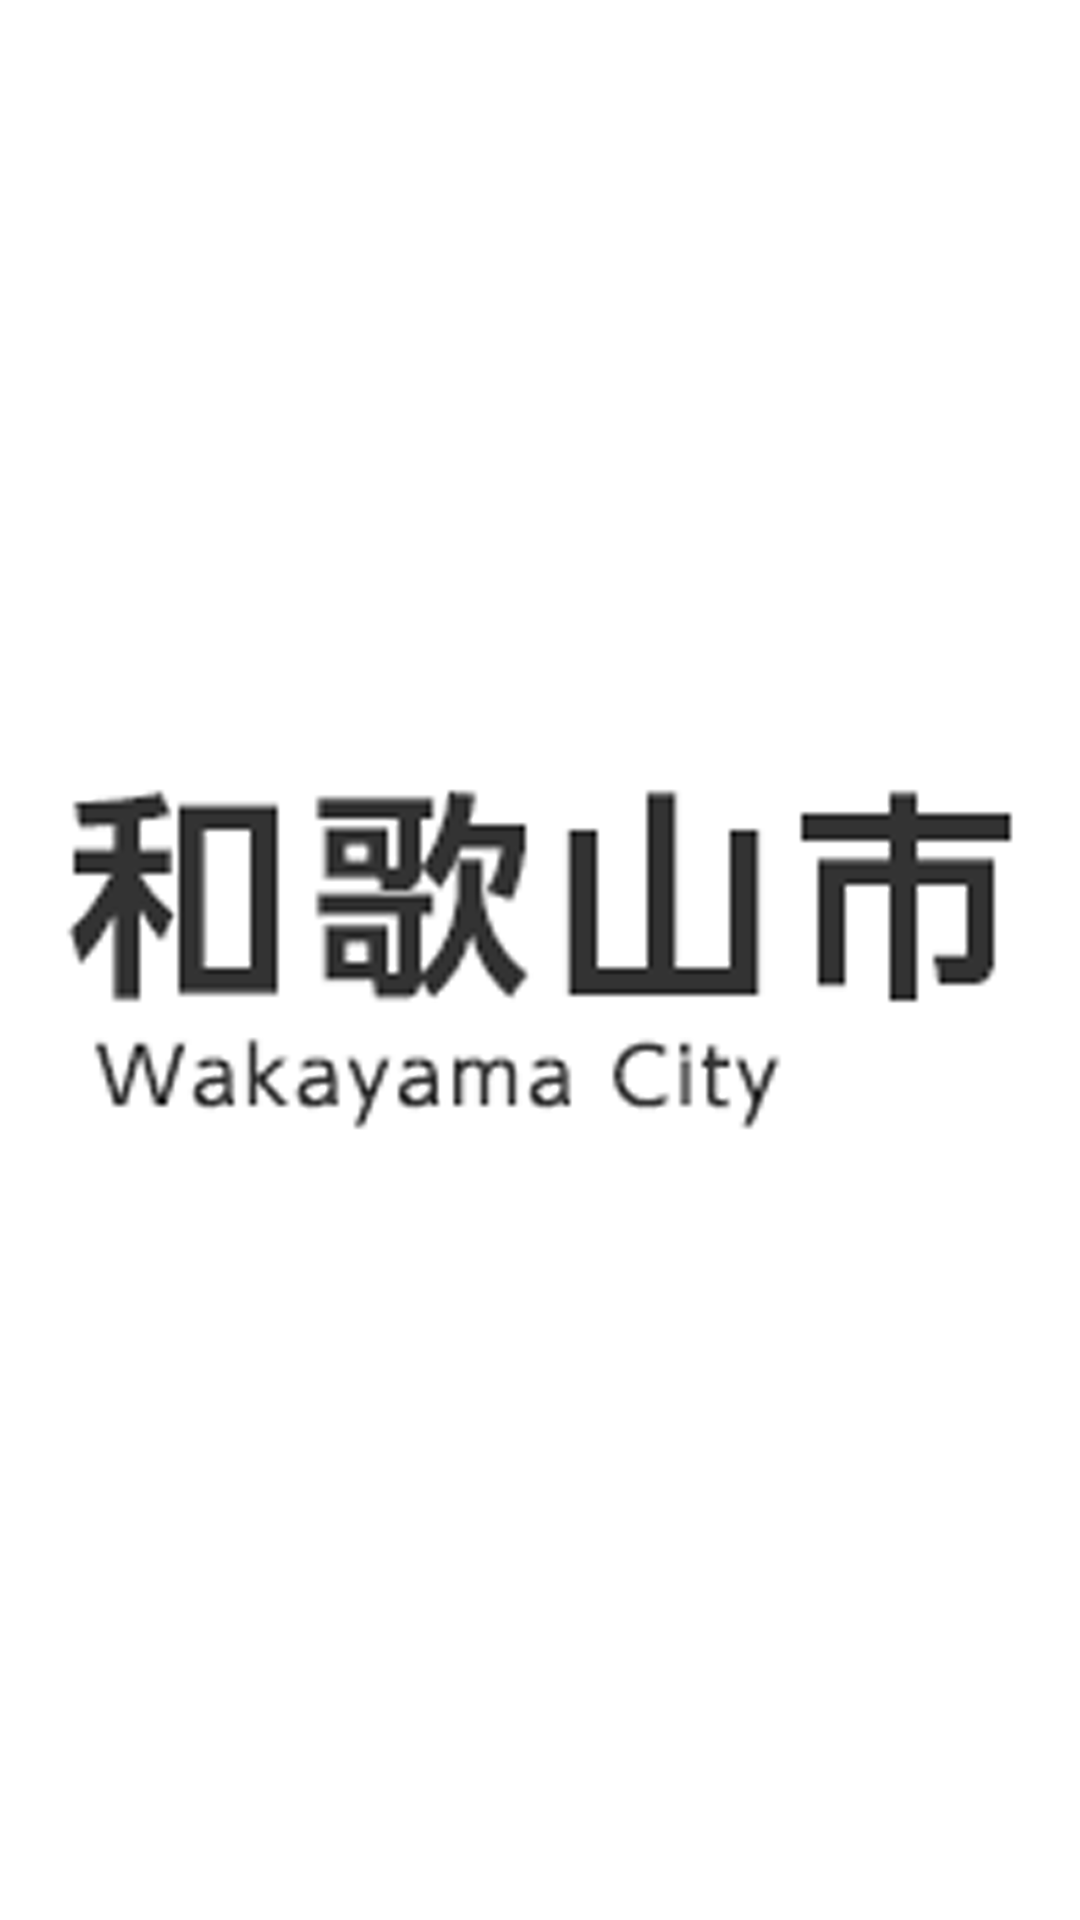 <br />
<b>Warning</b>:  Trying to access array offset on value of type null in <b>/home/r0530757/public_html/wakayamacity.life/wp-content/themes/wakayama/archive.php</b> on line <b>40</b><br />
